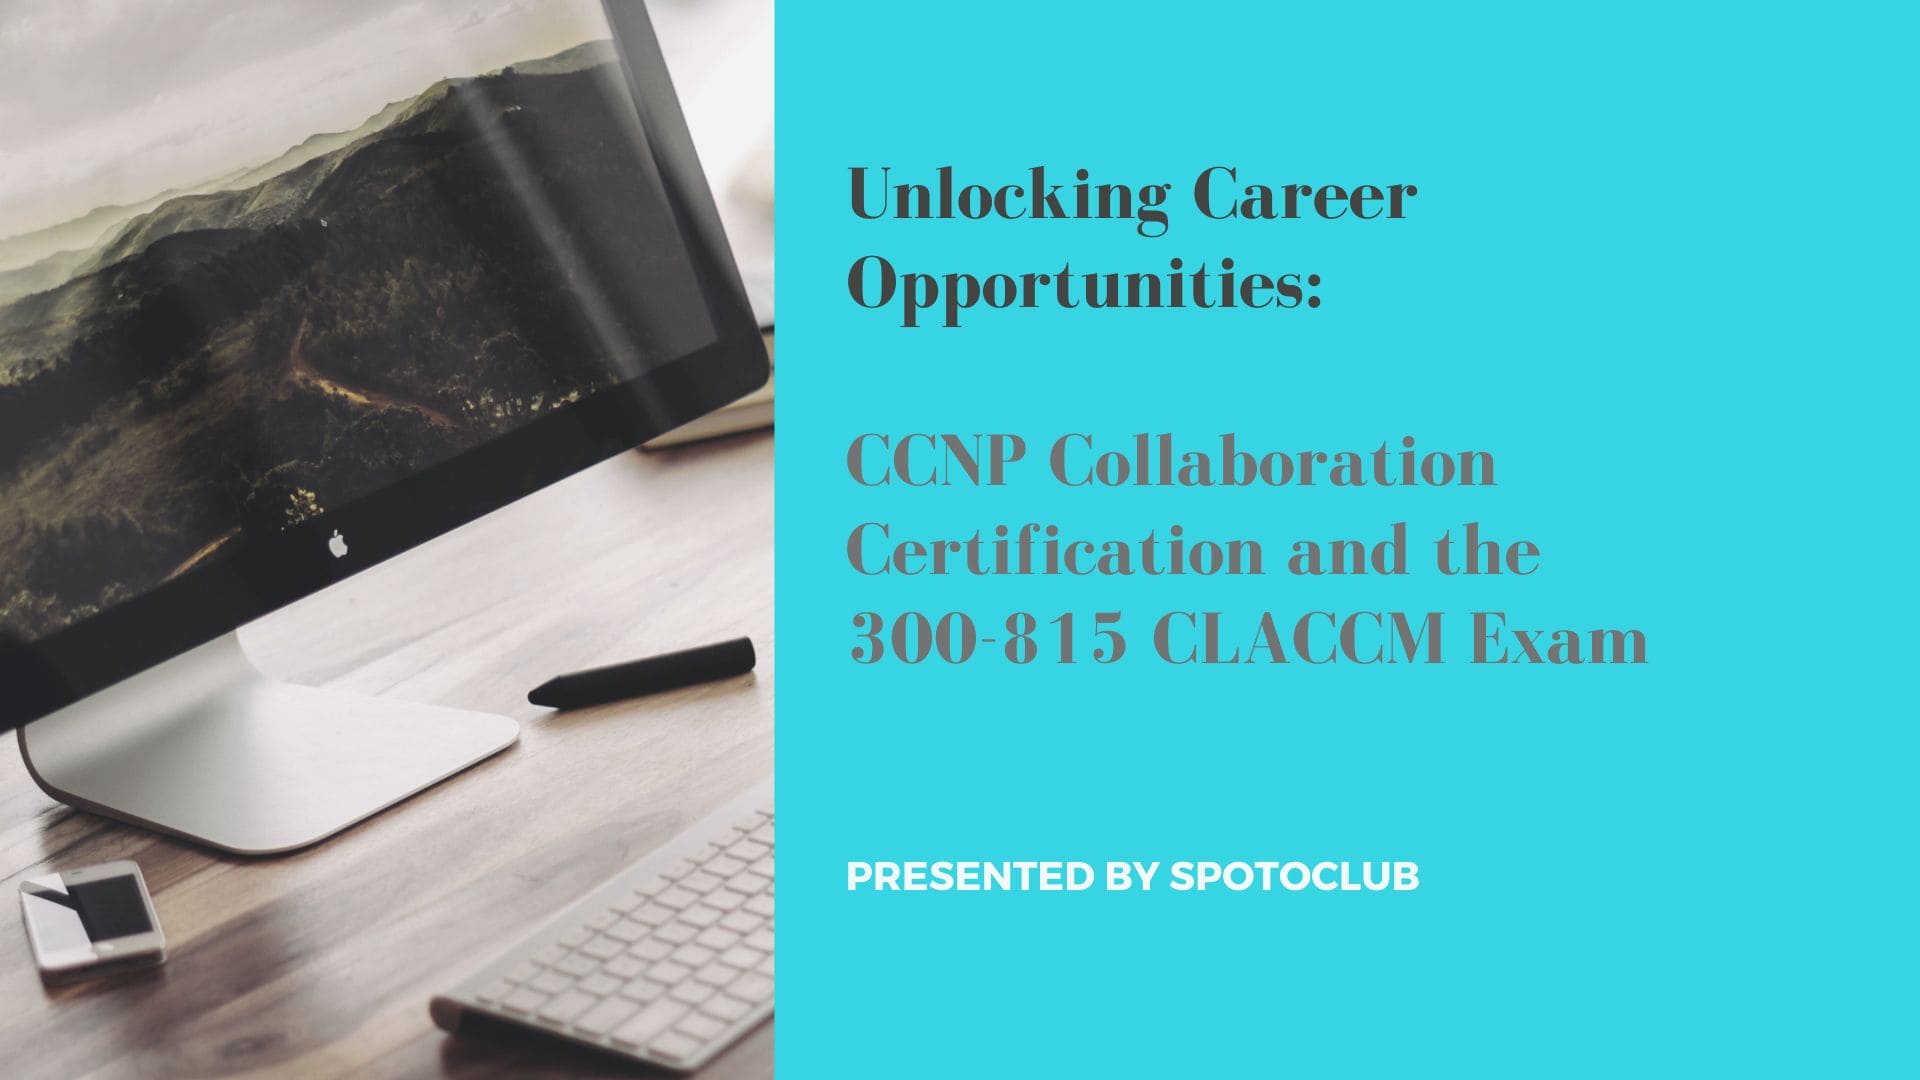 CCNP Collaboration Certification and the 300-815 CLACCM Exam